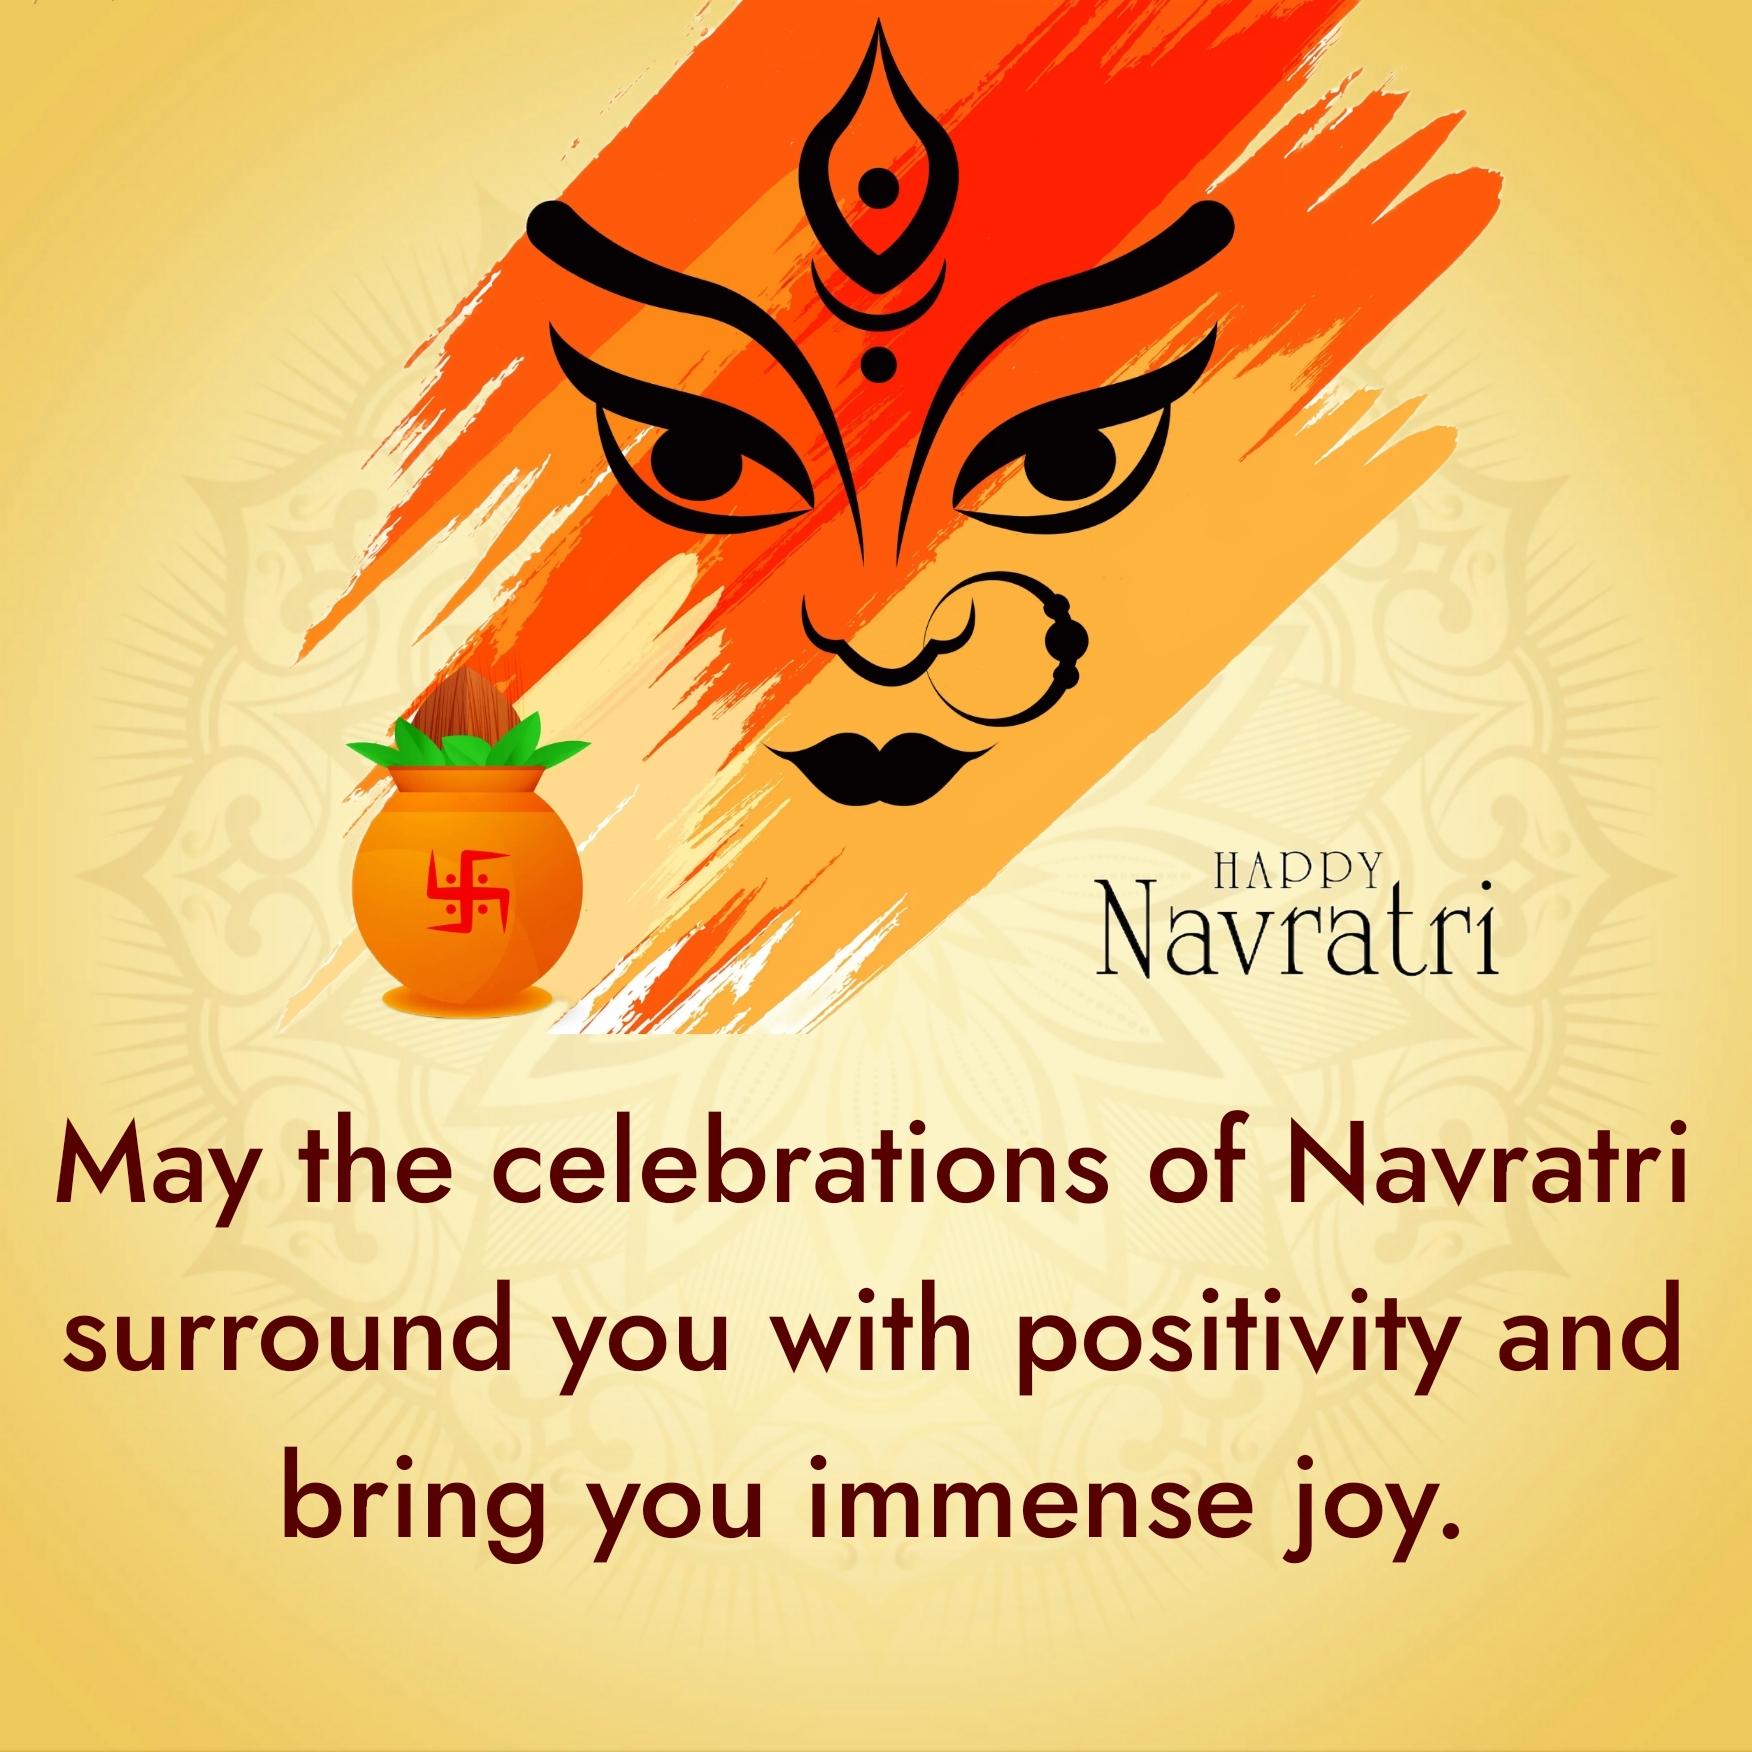 May the celebrations of Navratri surround you with positivity